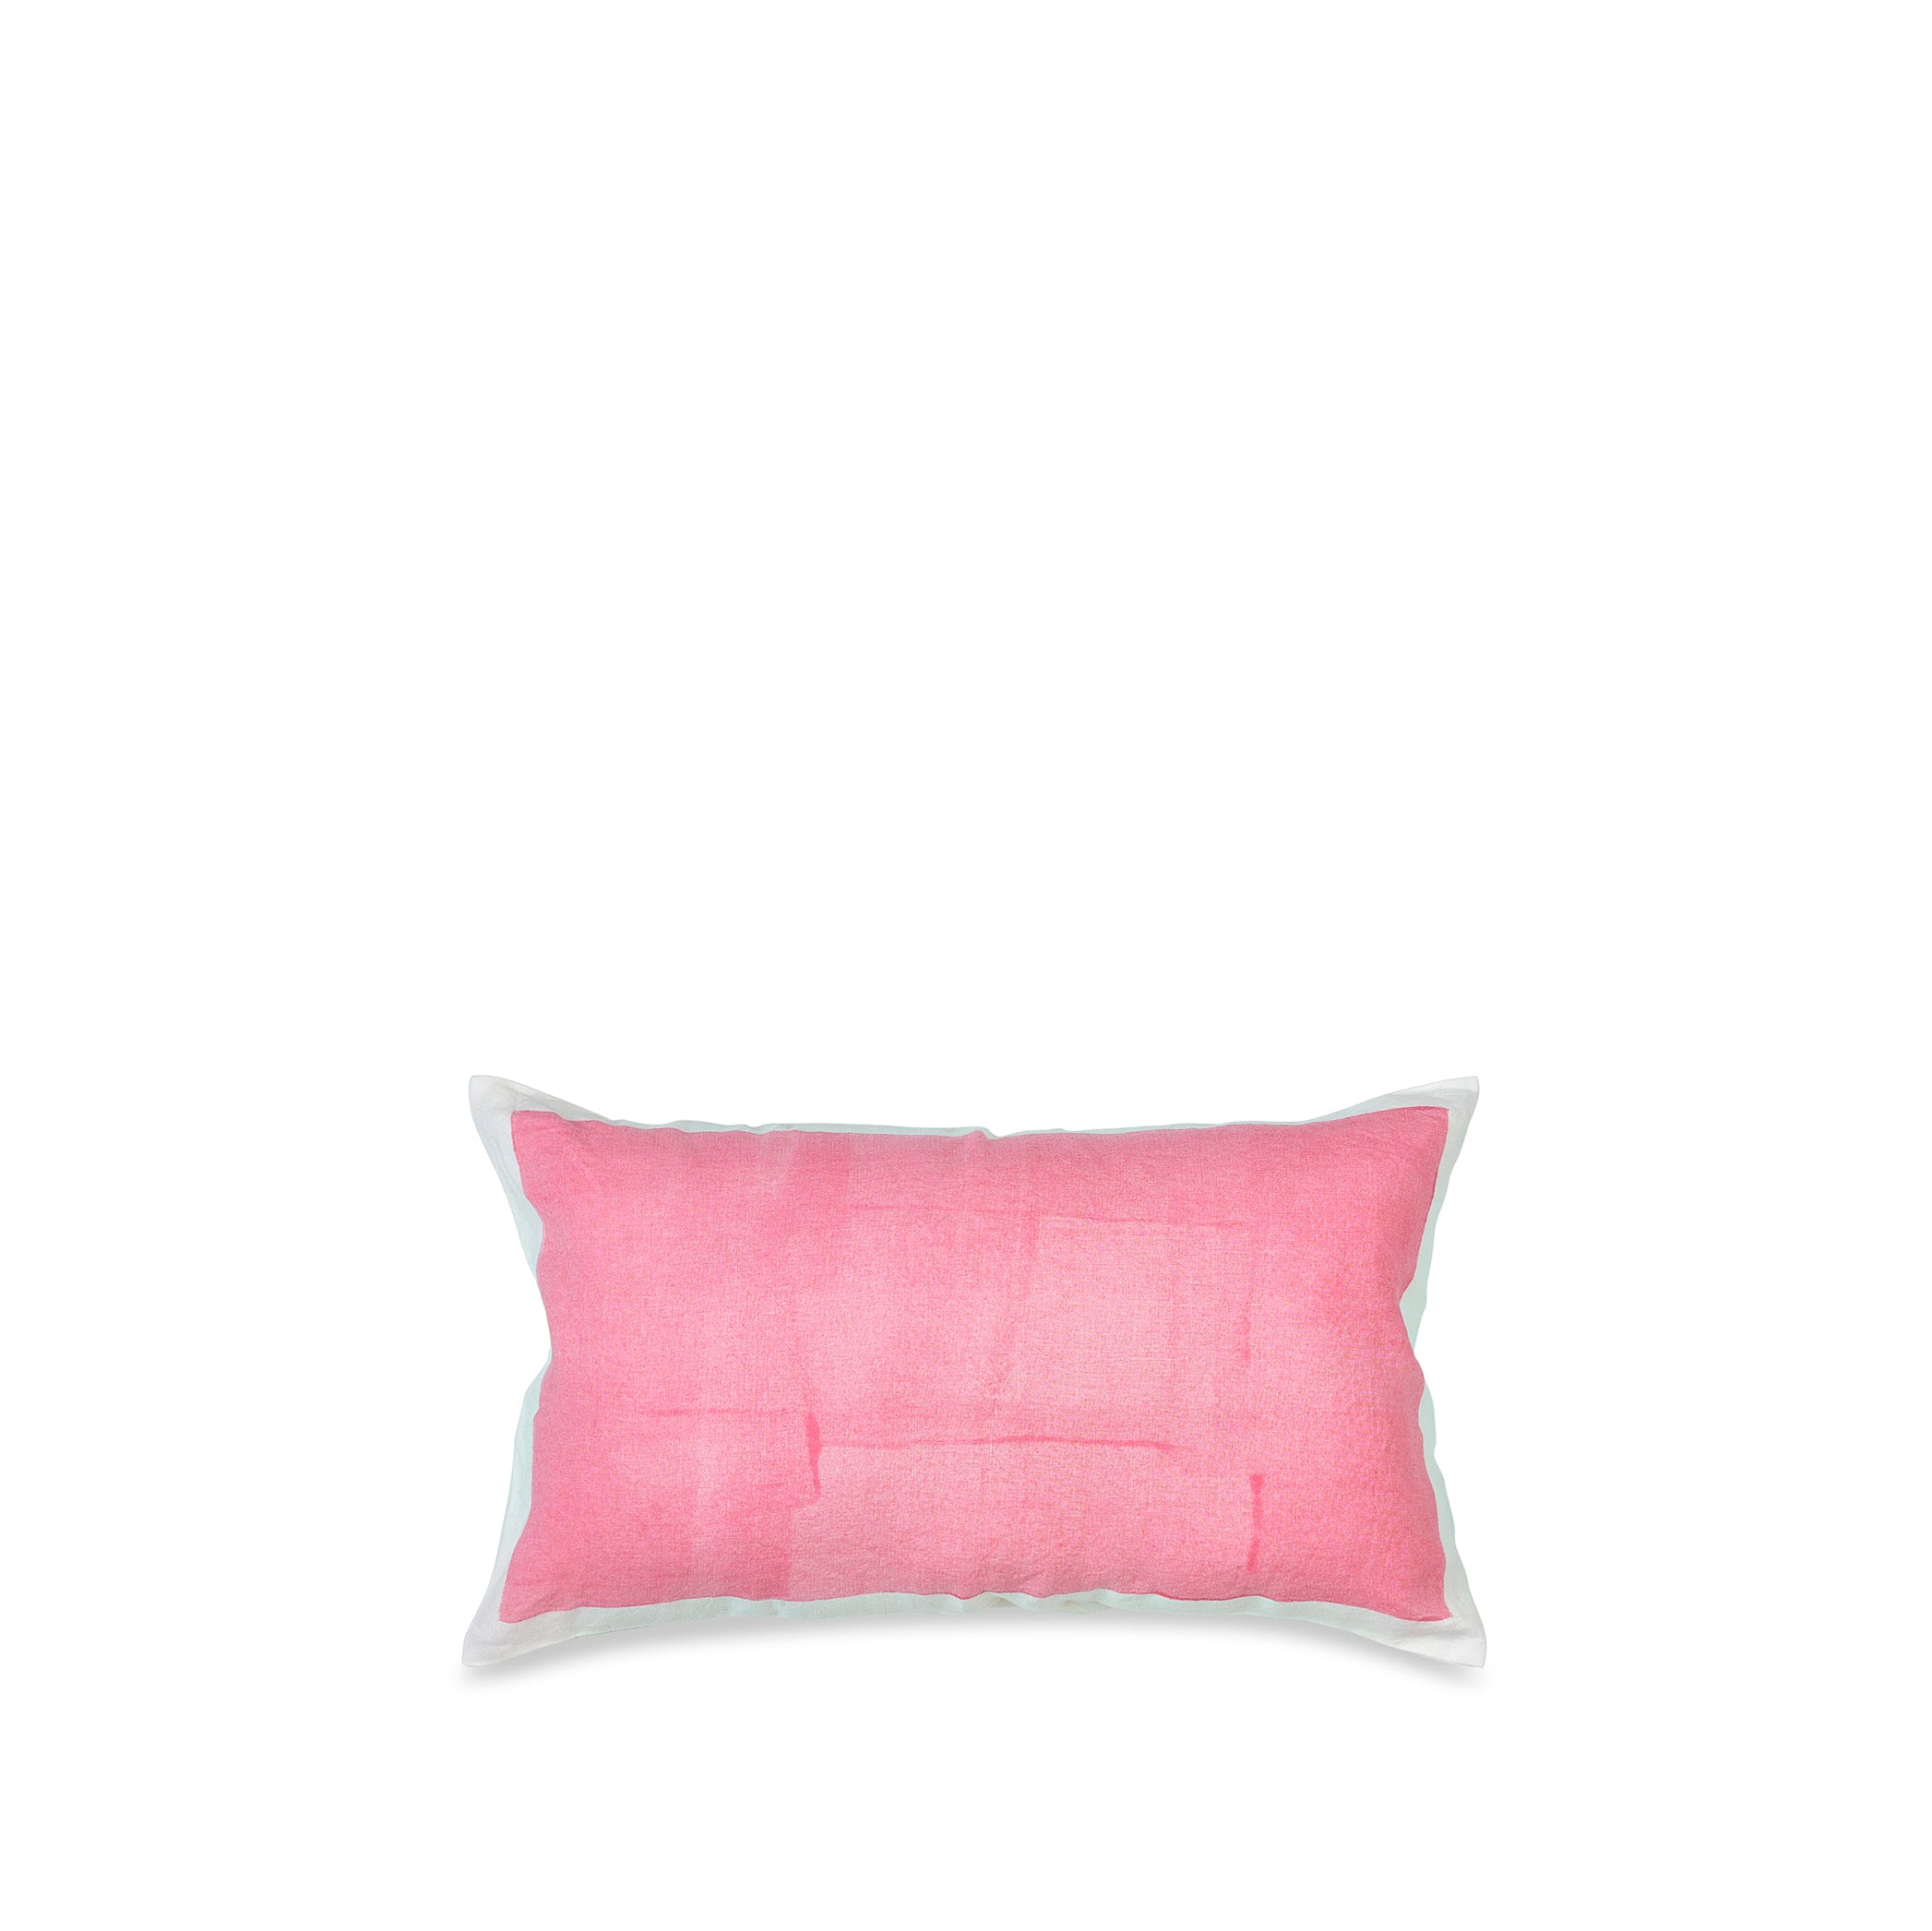 Hand Painted Linen Cushion in Rose Pink, 50cm x 30cm